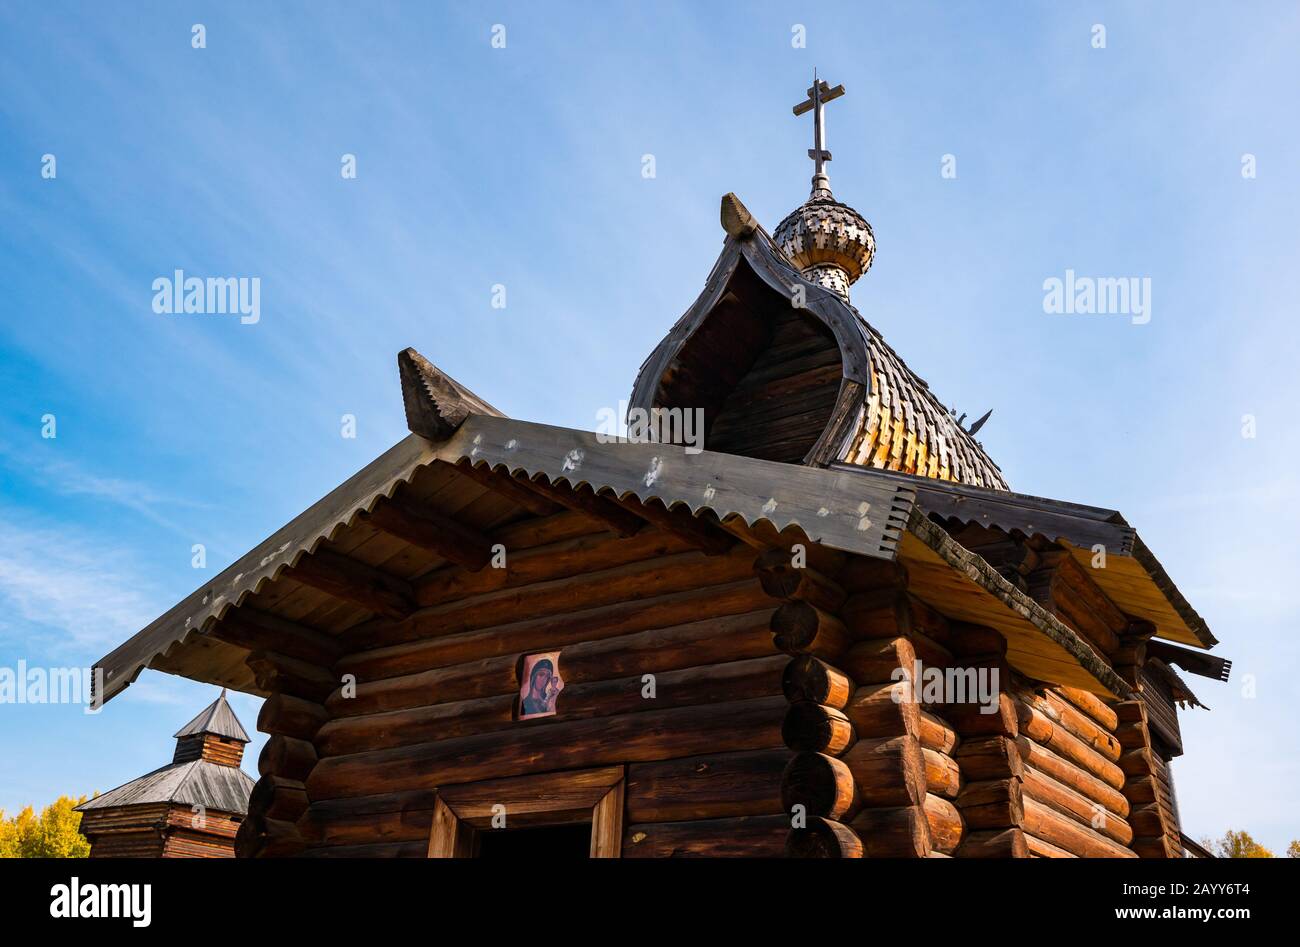 Traditional style wooden Russian Orthodox chapel or church, Taltsy Museum of Wooden Architecture, Irkutsk Region, Siberia, Russia Stock Photo